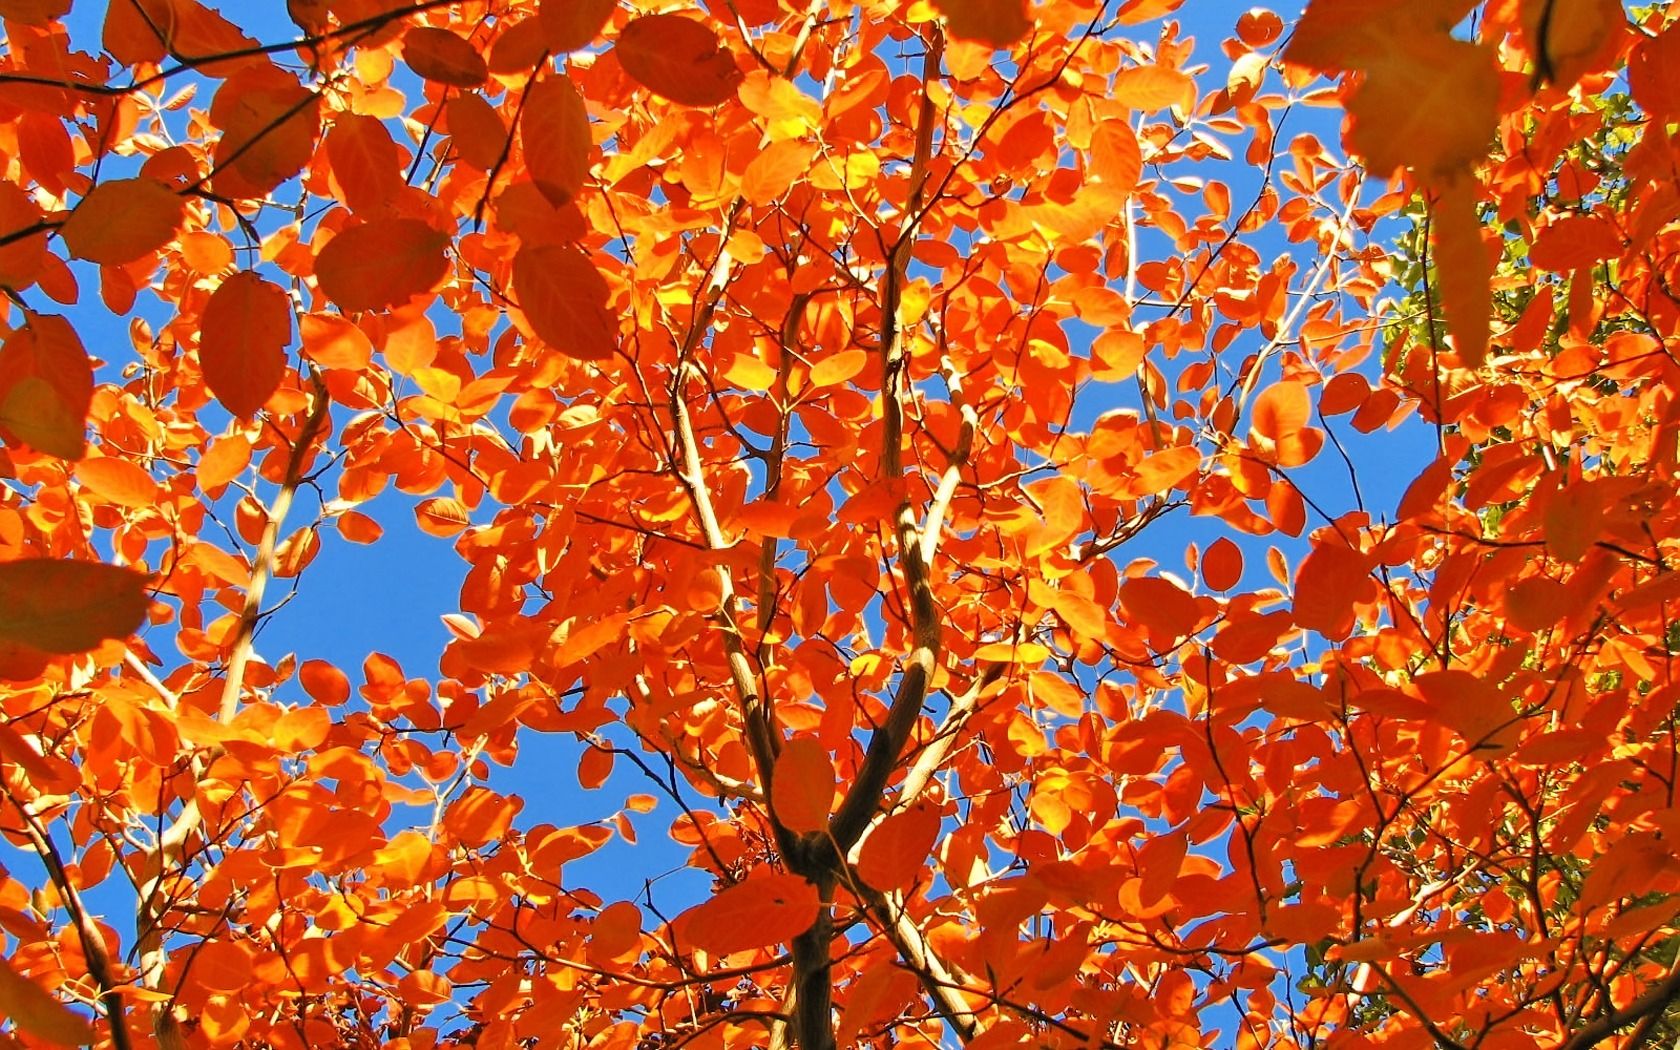 Every leaf is a flower Wallpaper Autumn Nature Wallpaper in jpg format for free download